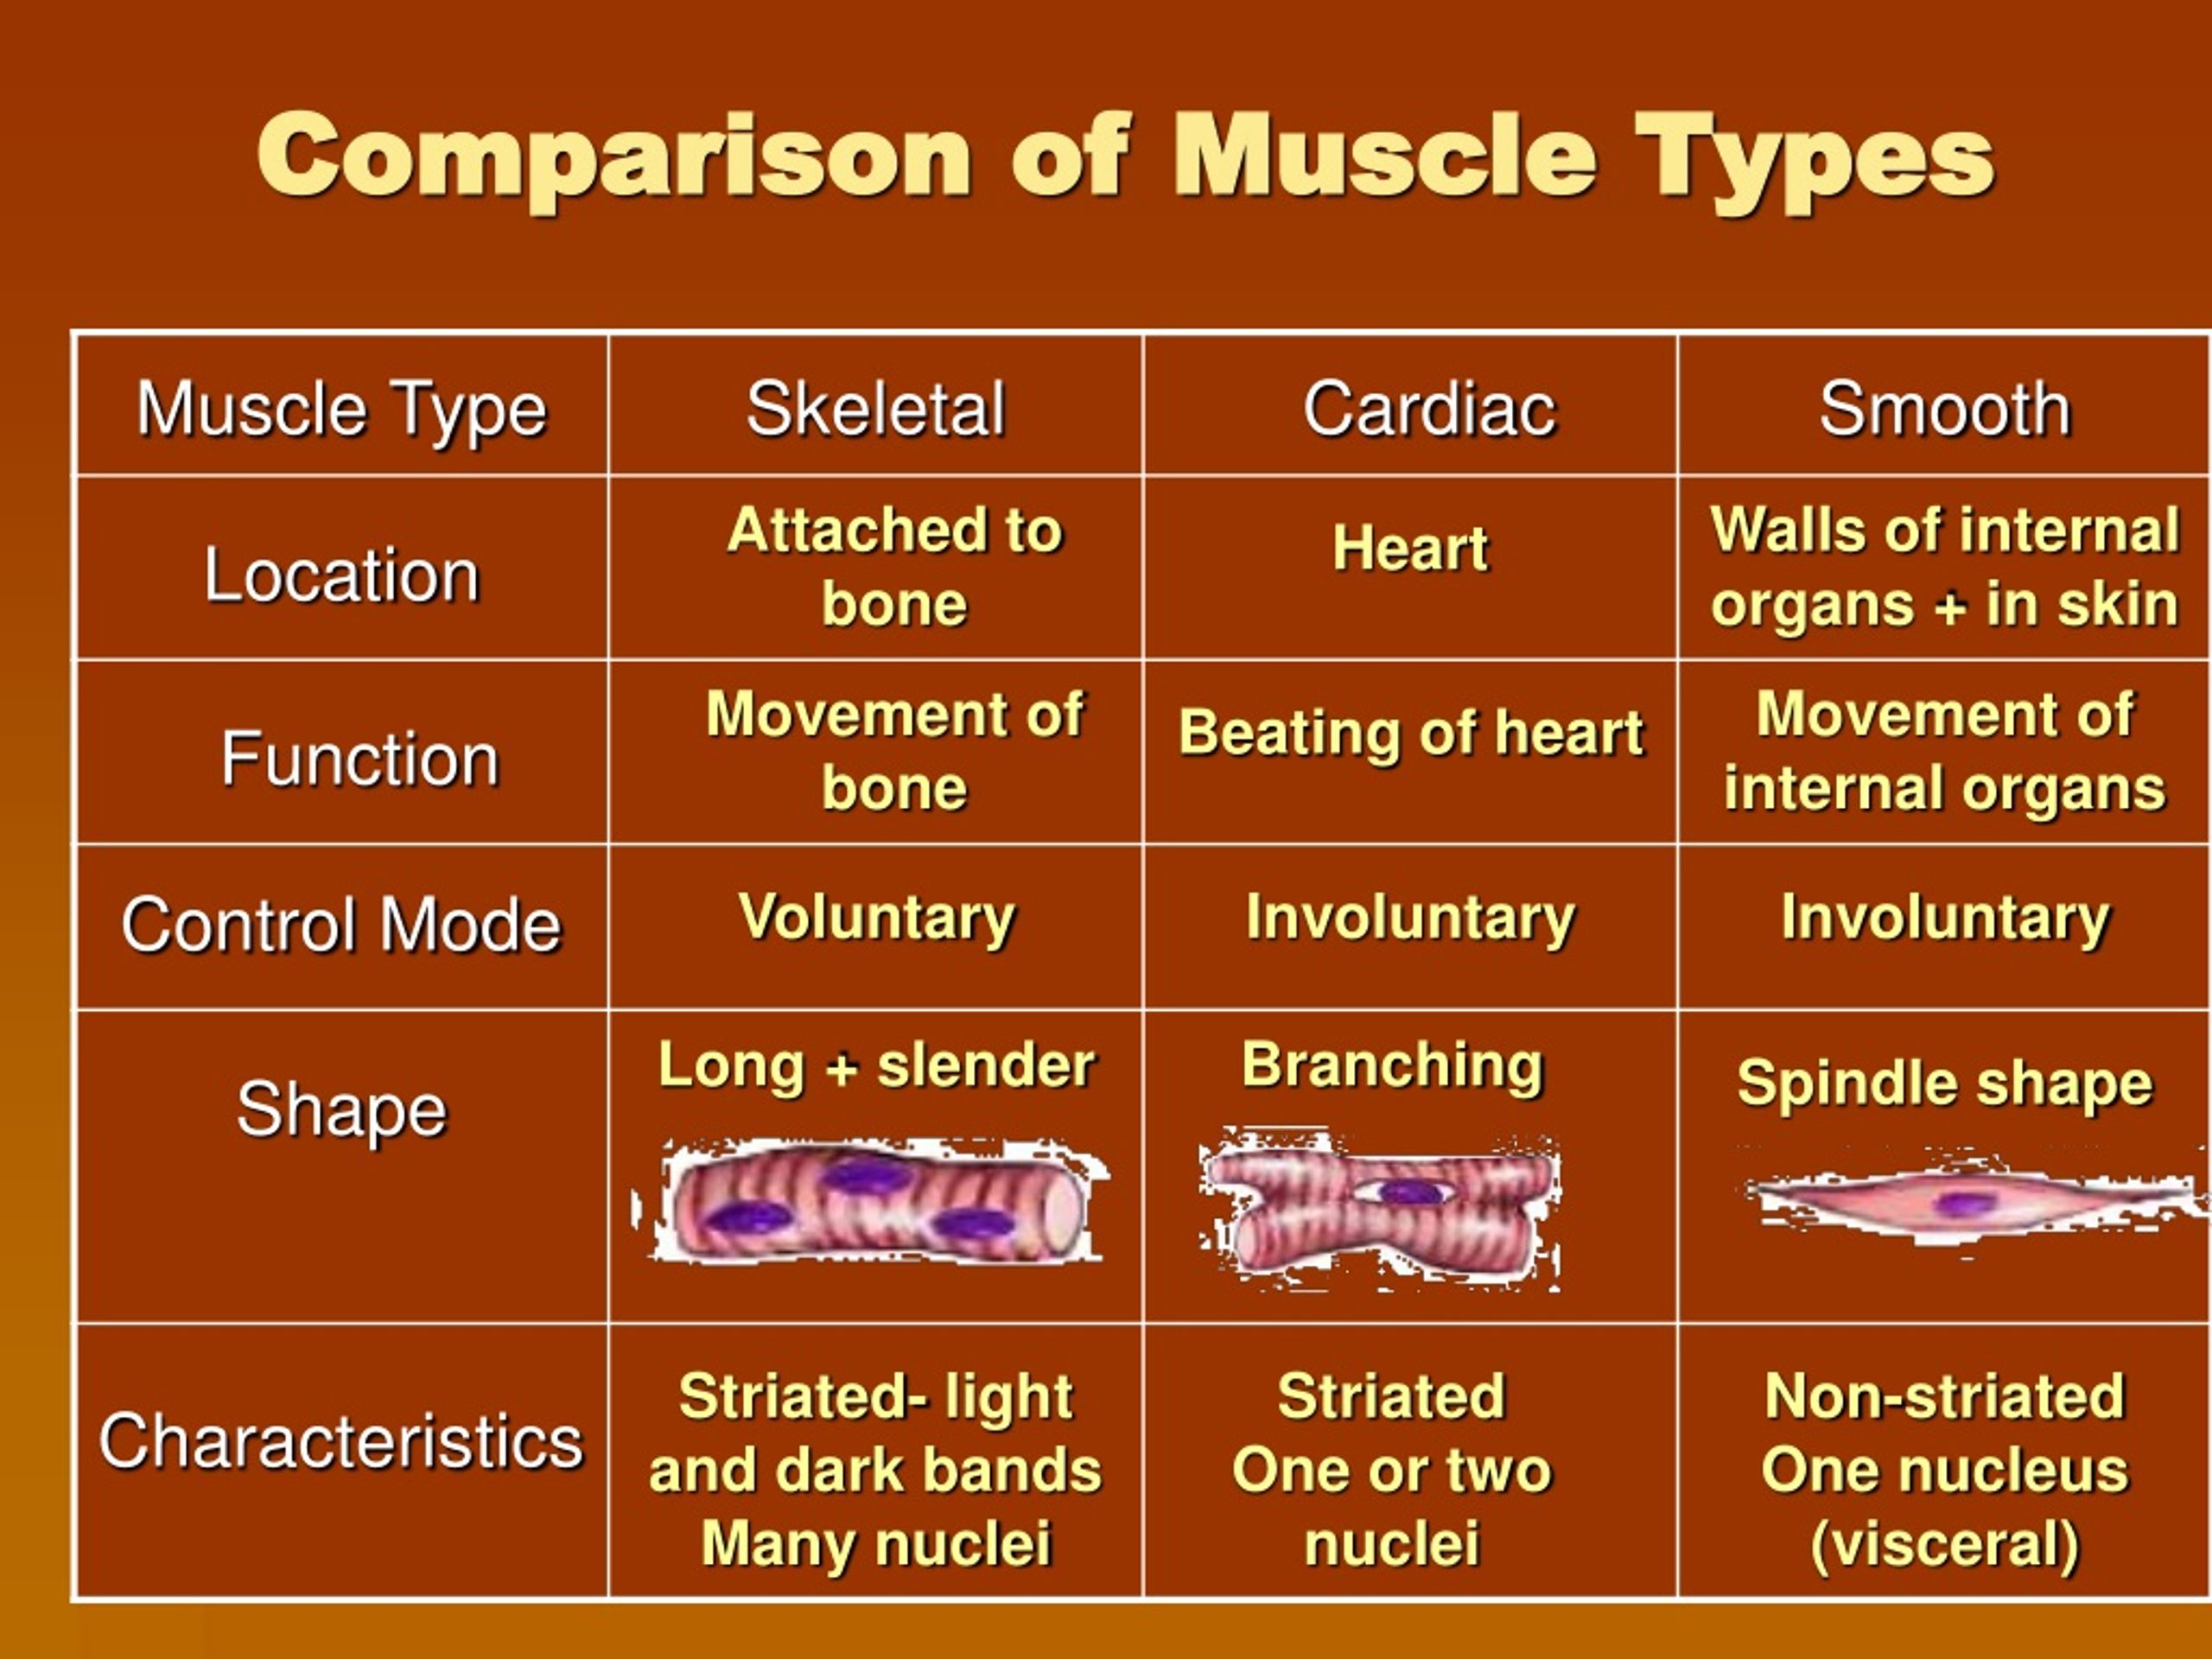 Types of comparisons. Muscle Comparison. Types of muscle skeletal smooth and Cardiac muscle таблица на русском. There are … Types of muscles.. Comparision.